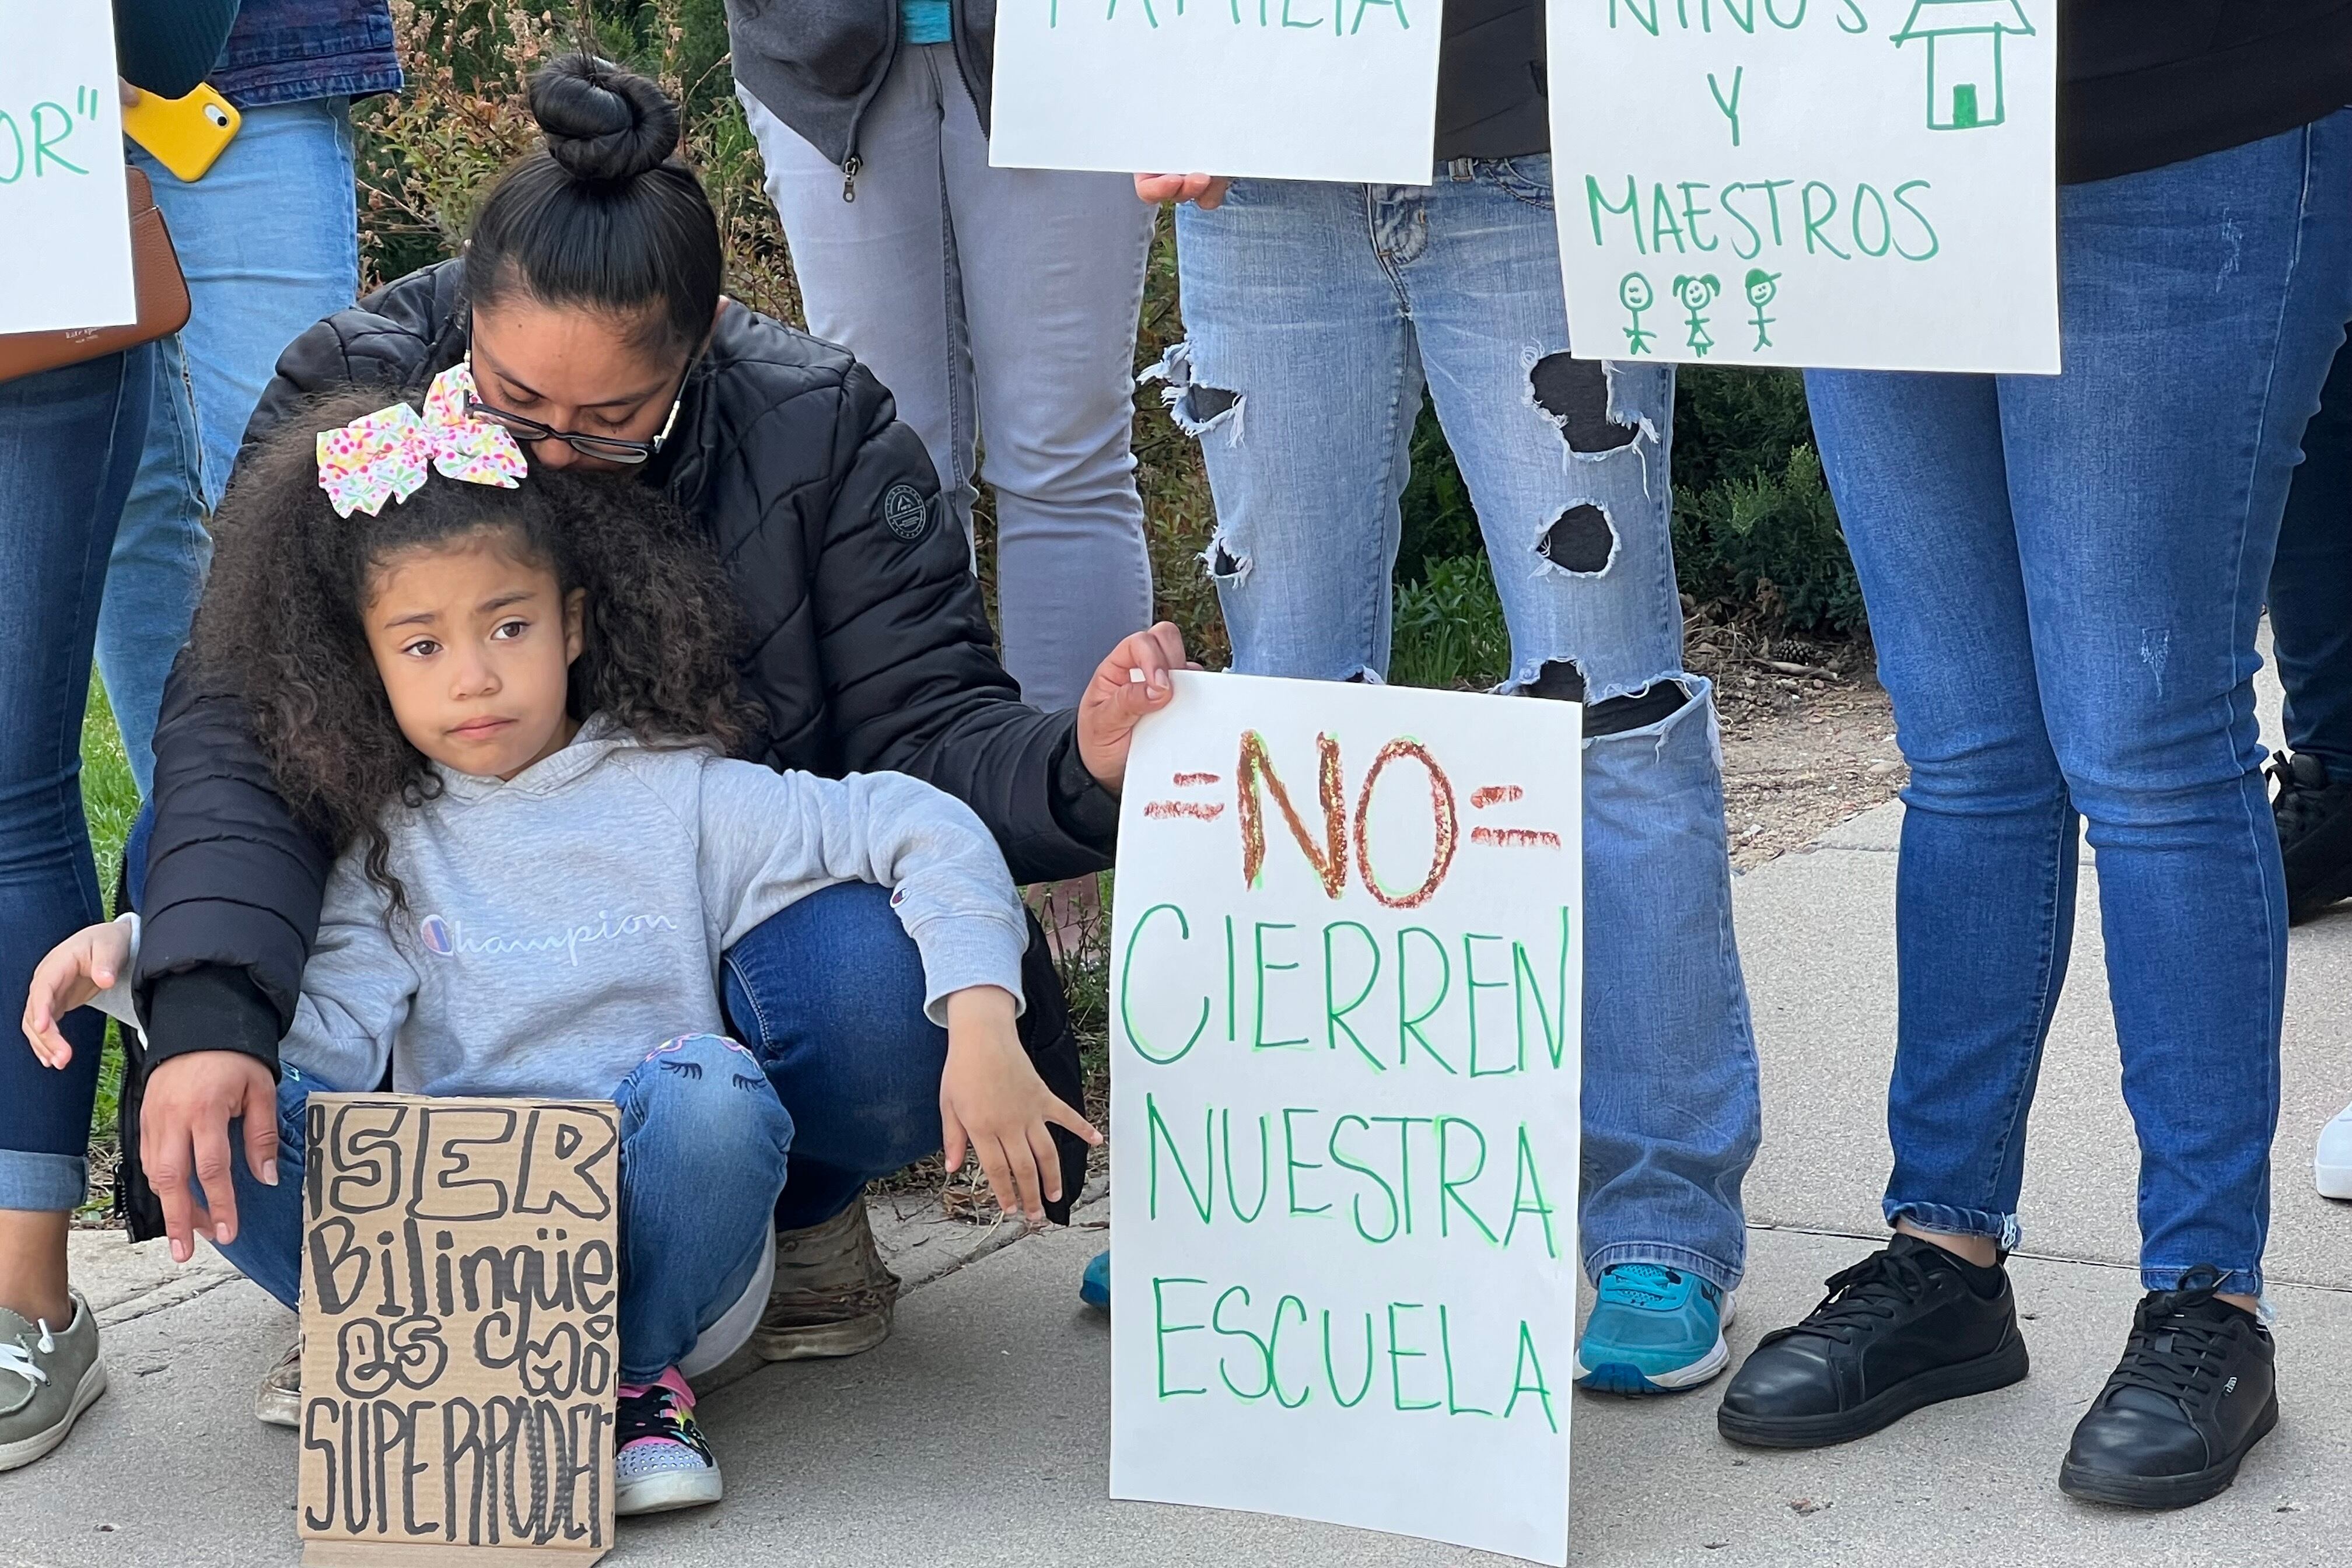 A little girl wearing jeans, a sweatshirt, and a hair bow holds a cardboard sign. In black marker, it says “Ser Bilingüe Es Mi Superpoder,” which means “Being Bilingual is my Superpower.”